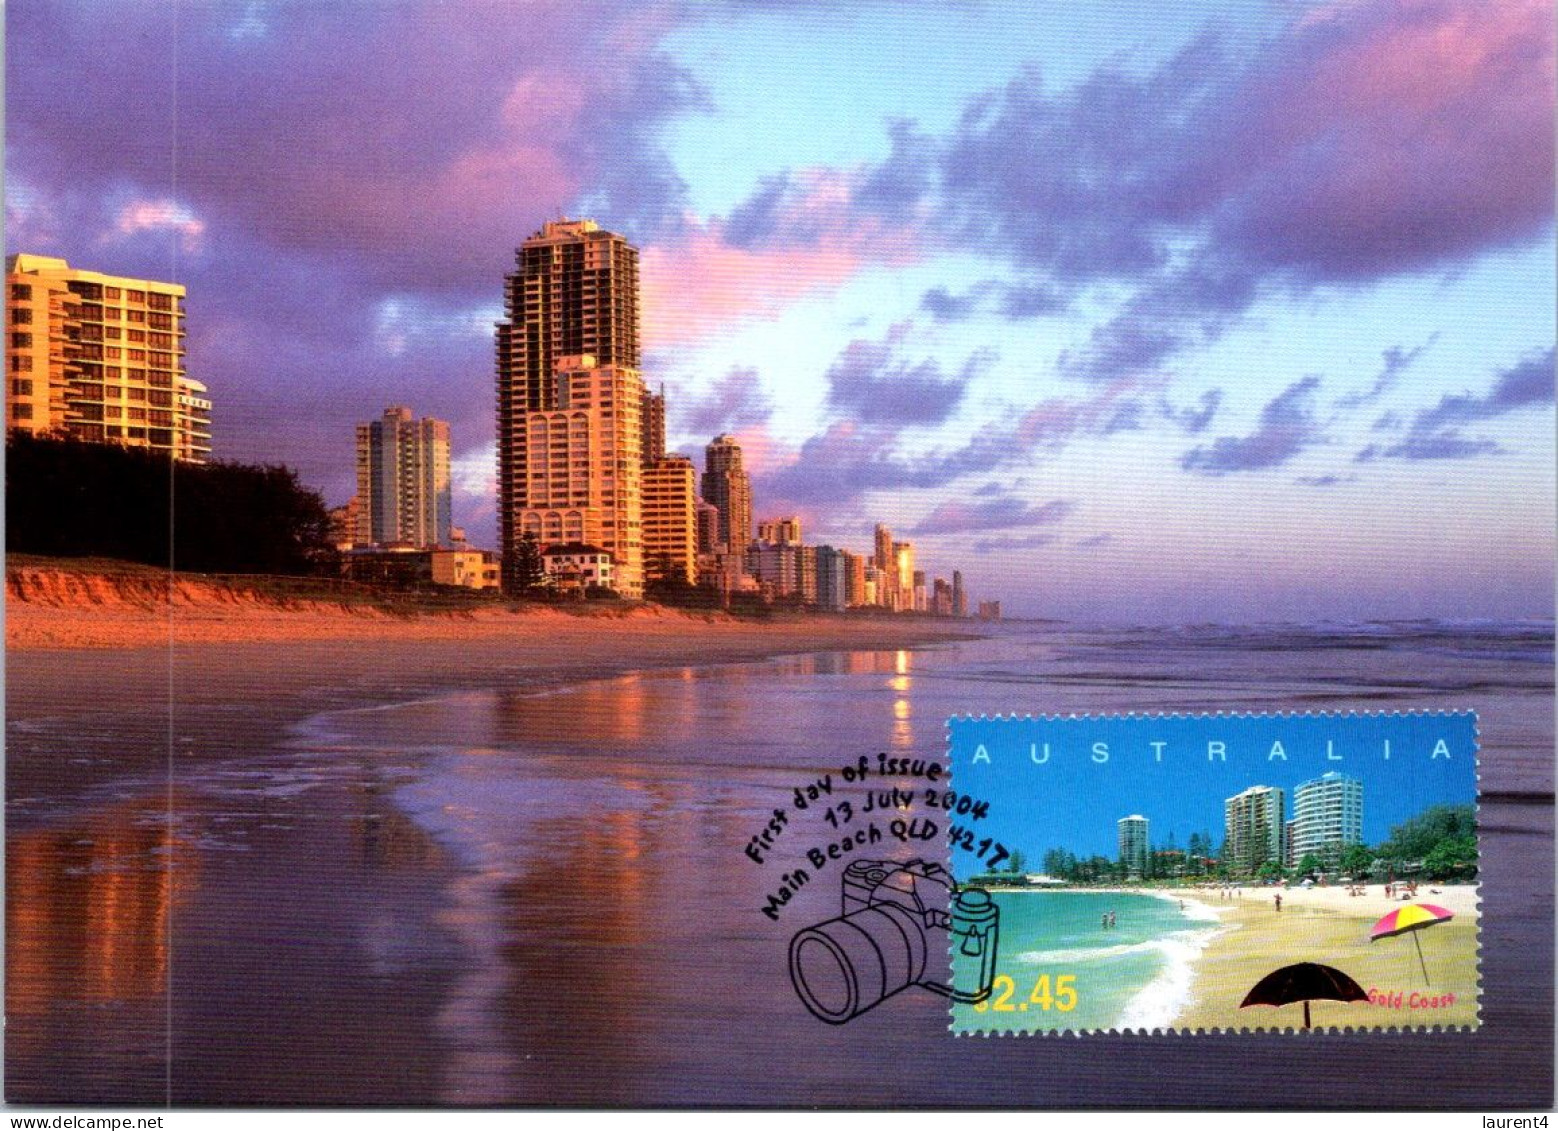 10-5-2024 (4 Z 38) Australia (1 Card) Maxicard (if Not Sold Will NOT Be Re-listed) Gold Coast - Cartas Máxima